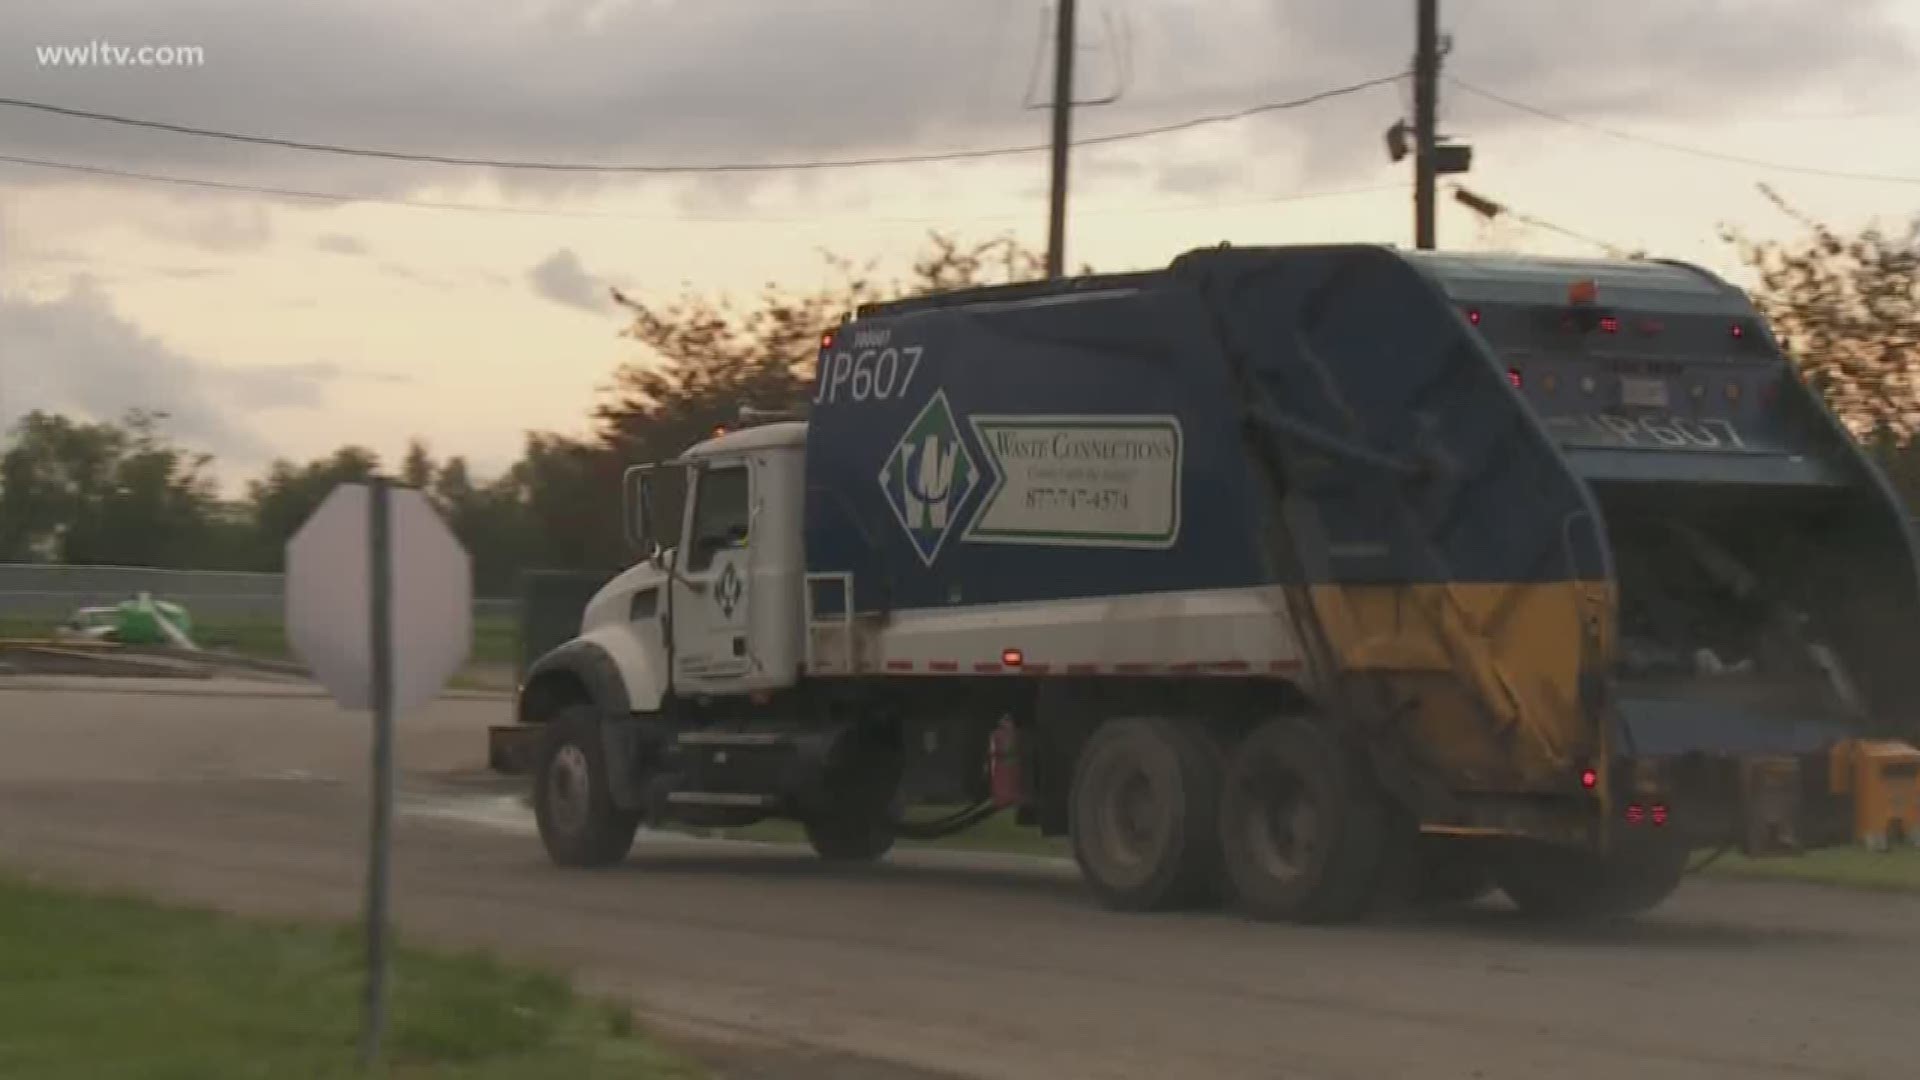 Jefferson Parish residents protest ahead of landfill smell update